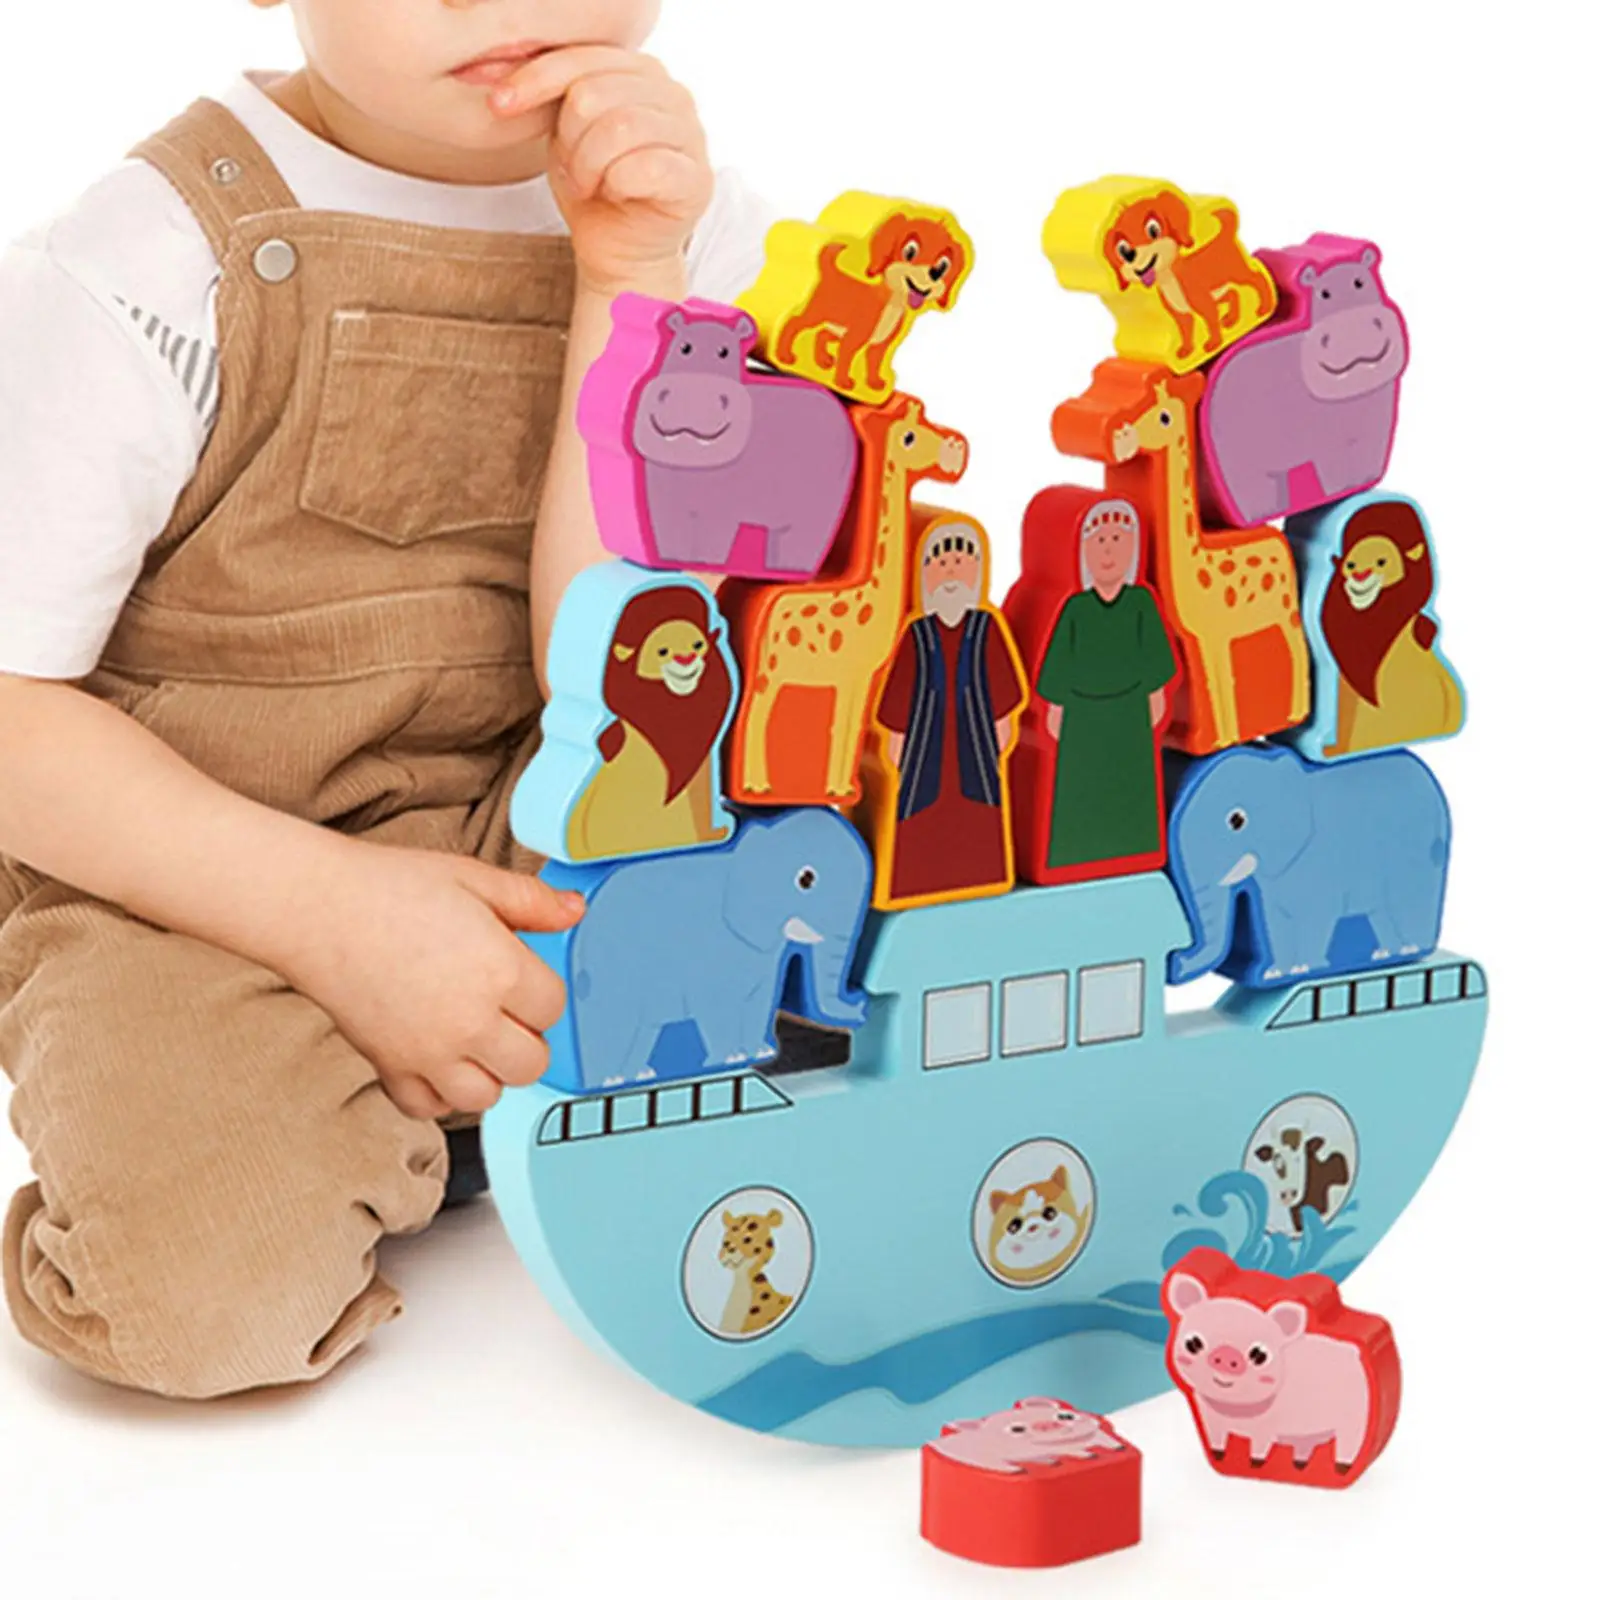 Wooden Balance Game Educational Toys Motor Skills Preschool Game for Birthday Gifts